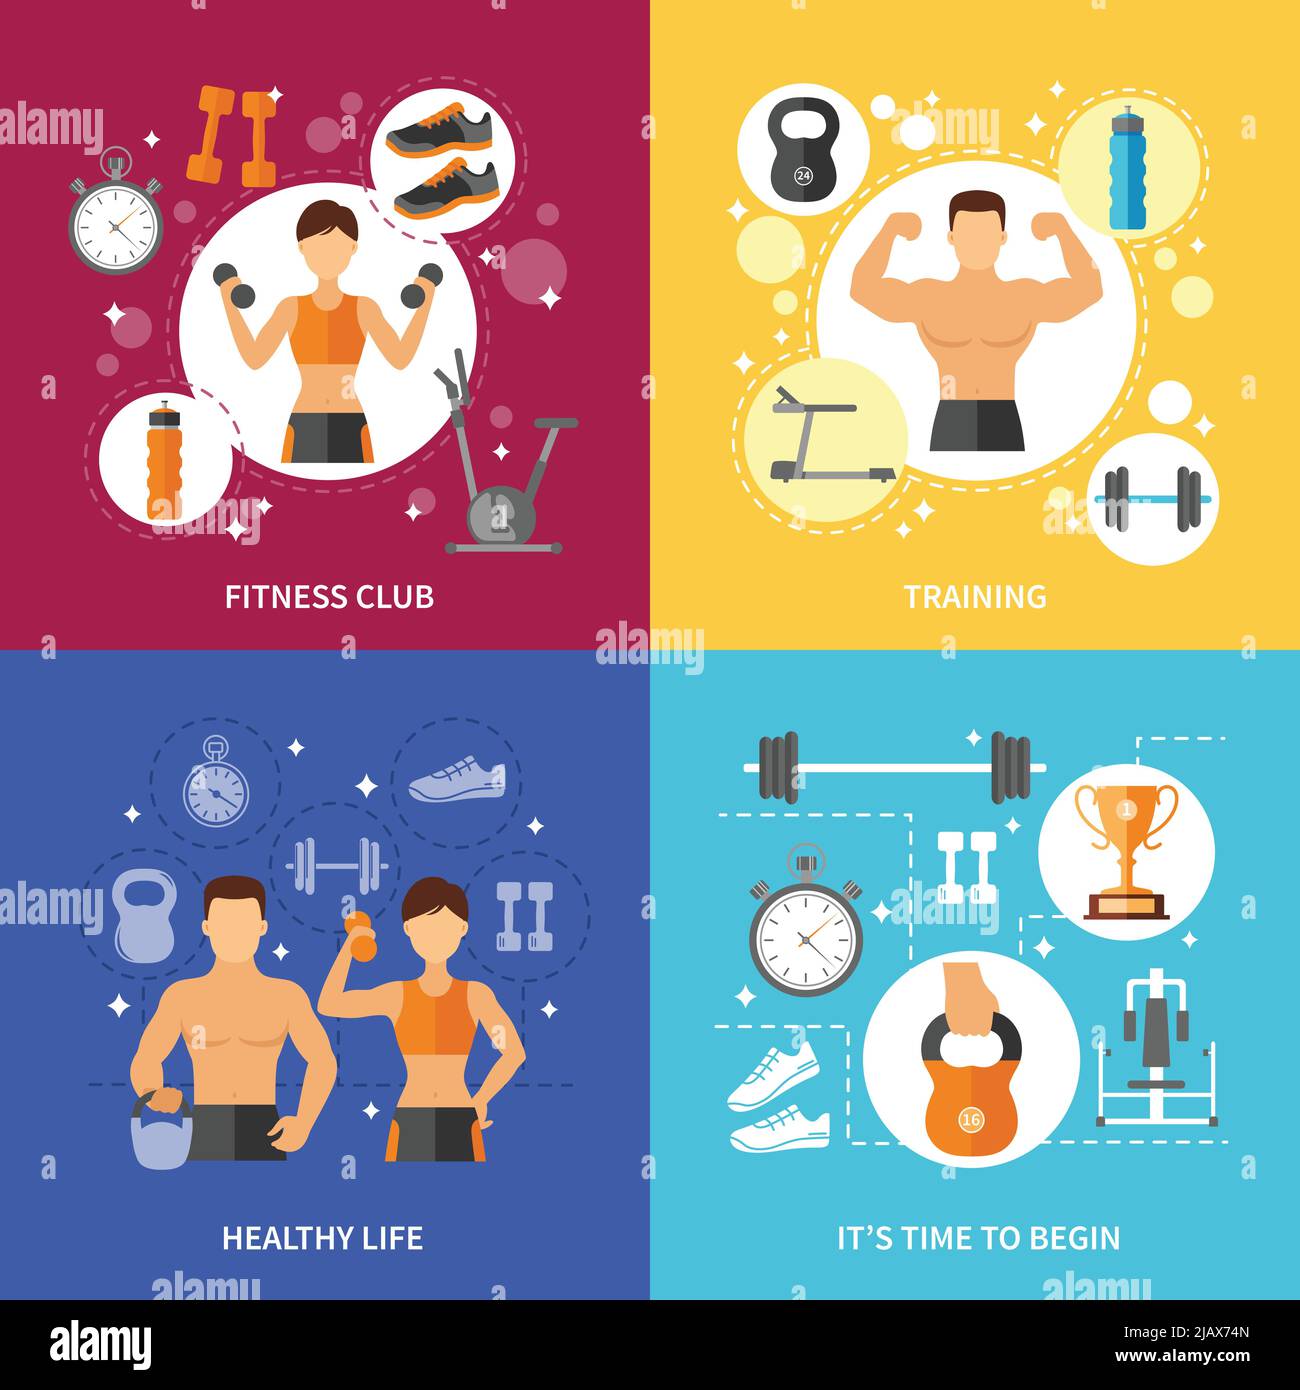 Fitness club sports training and time to begin healthy life flat color concept isolated vector illustration Stock Vector